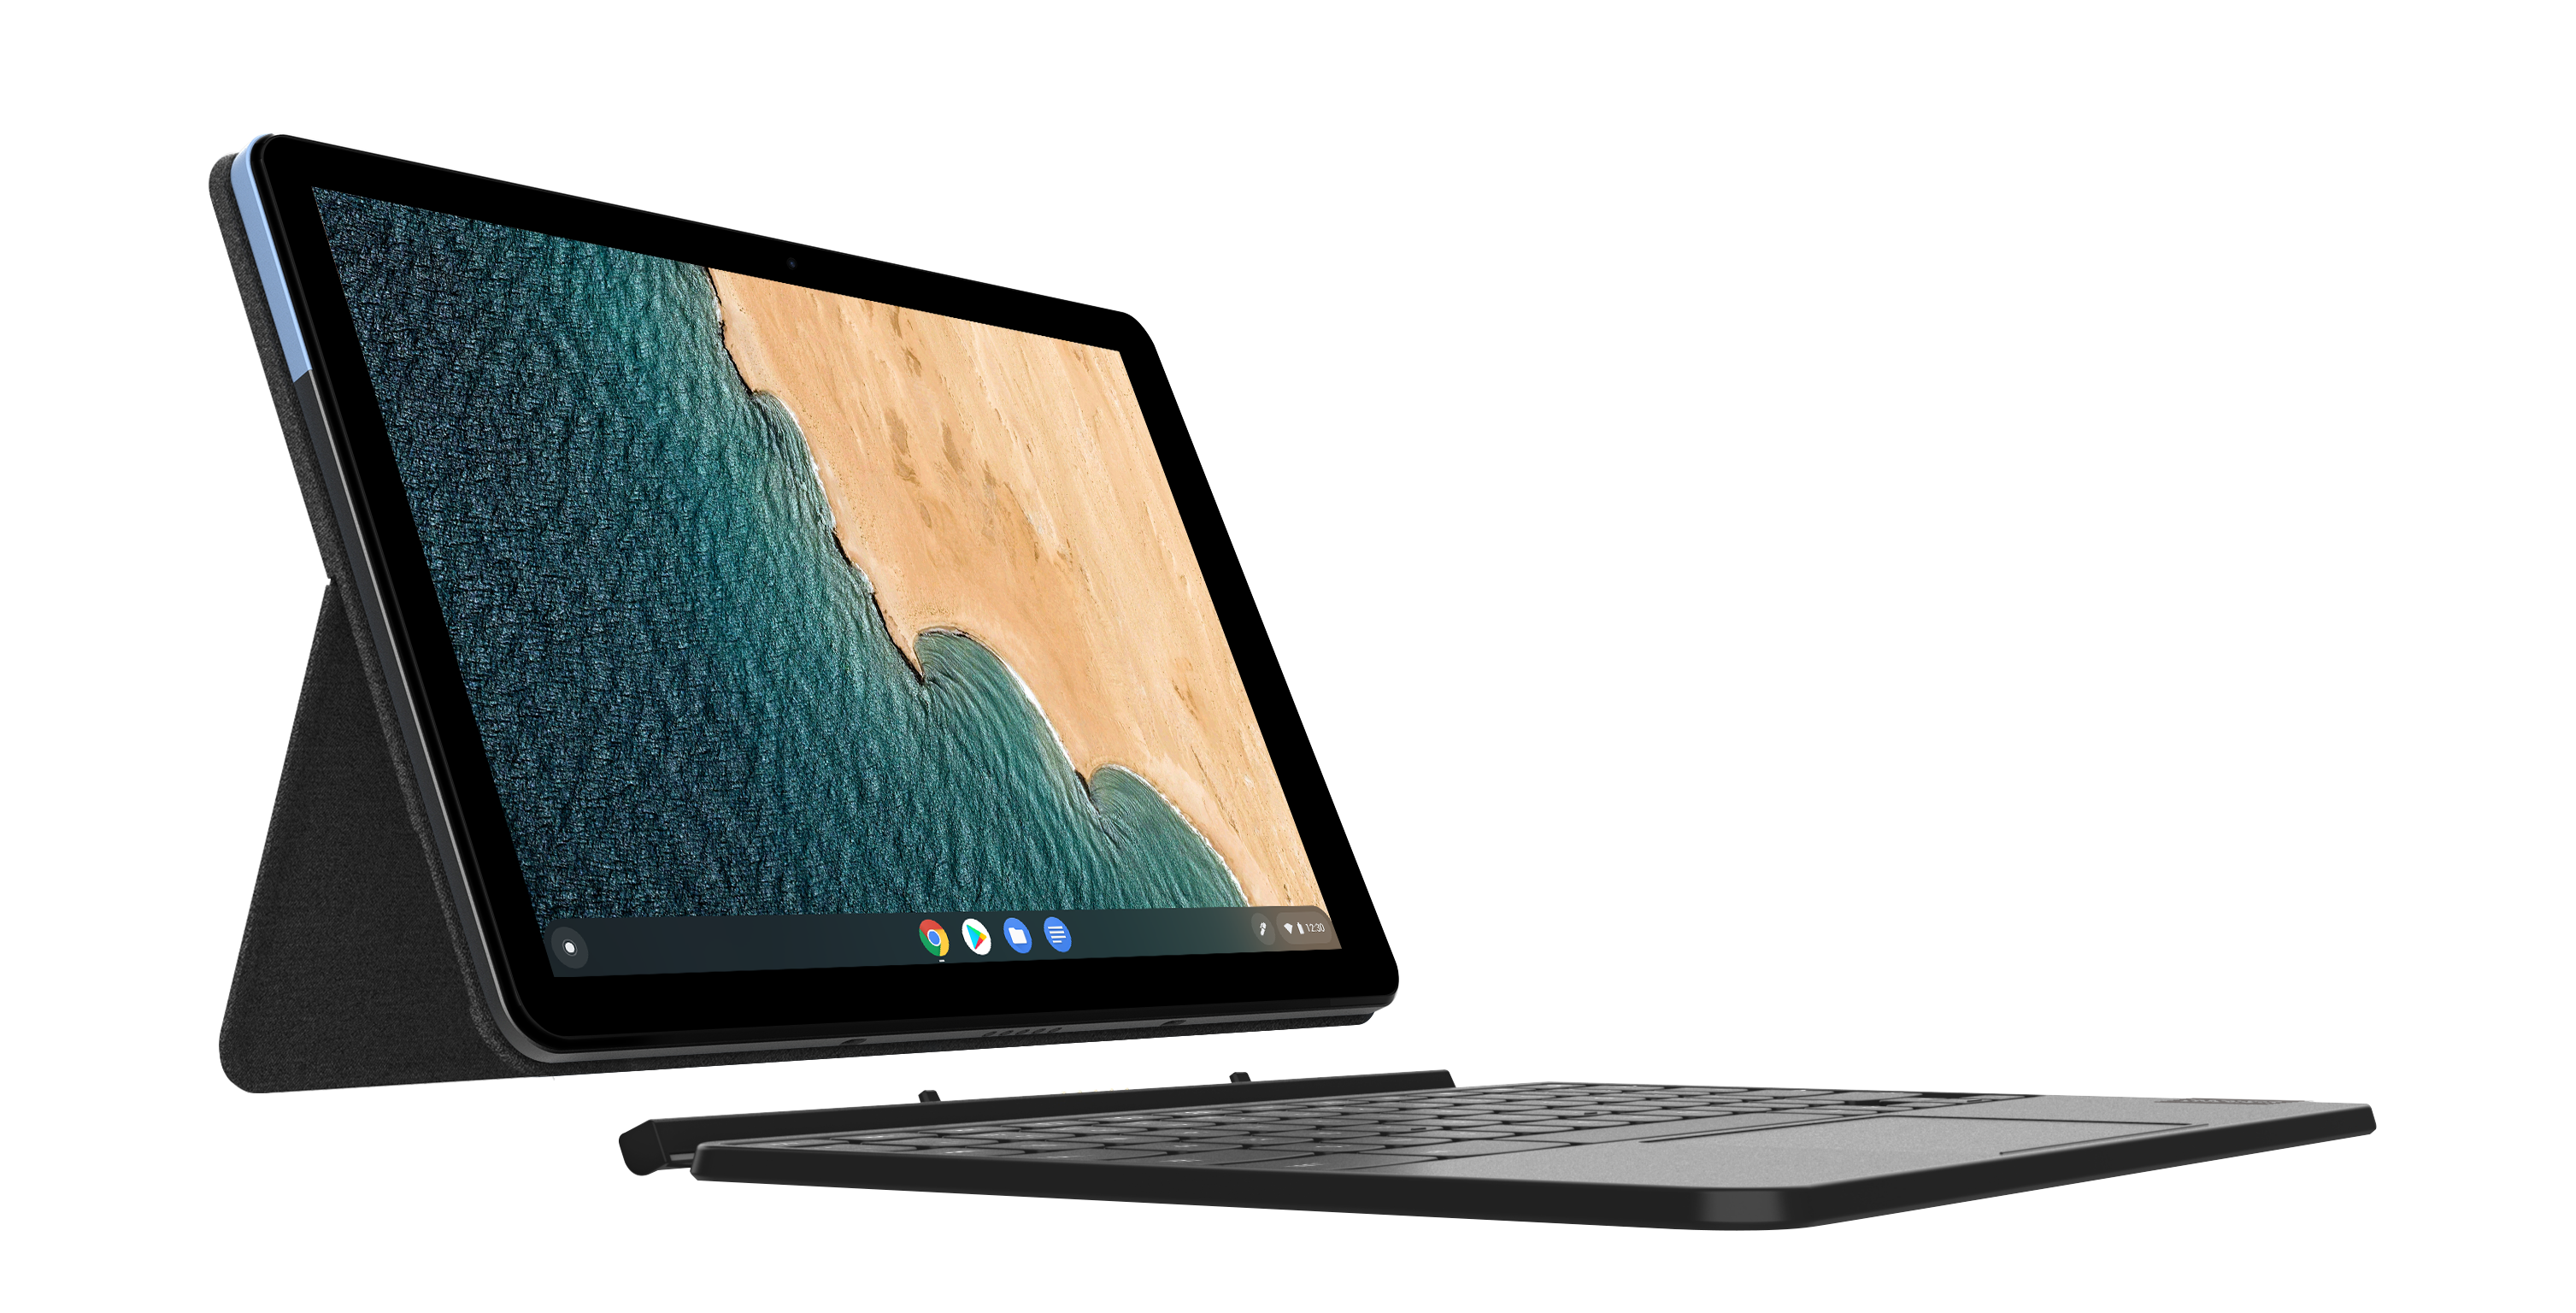 Lenovo IdeaPad Duet Chromebook drops at CES: A 10.1-inch tablet with included detachable keyboard